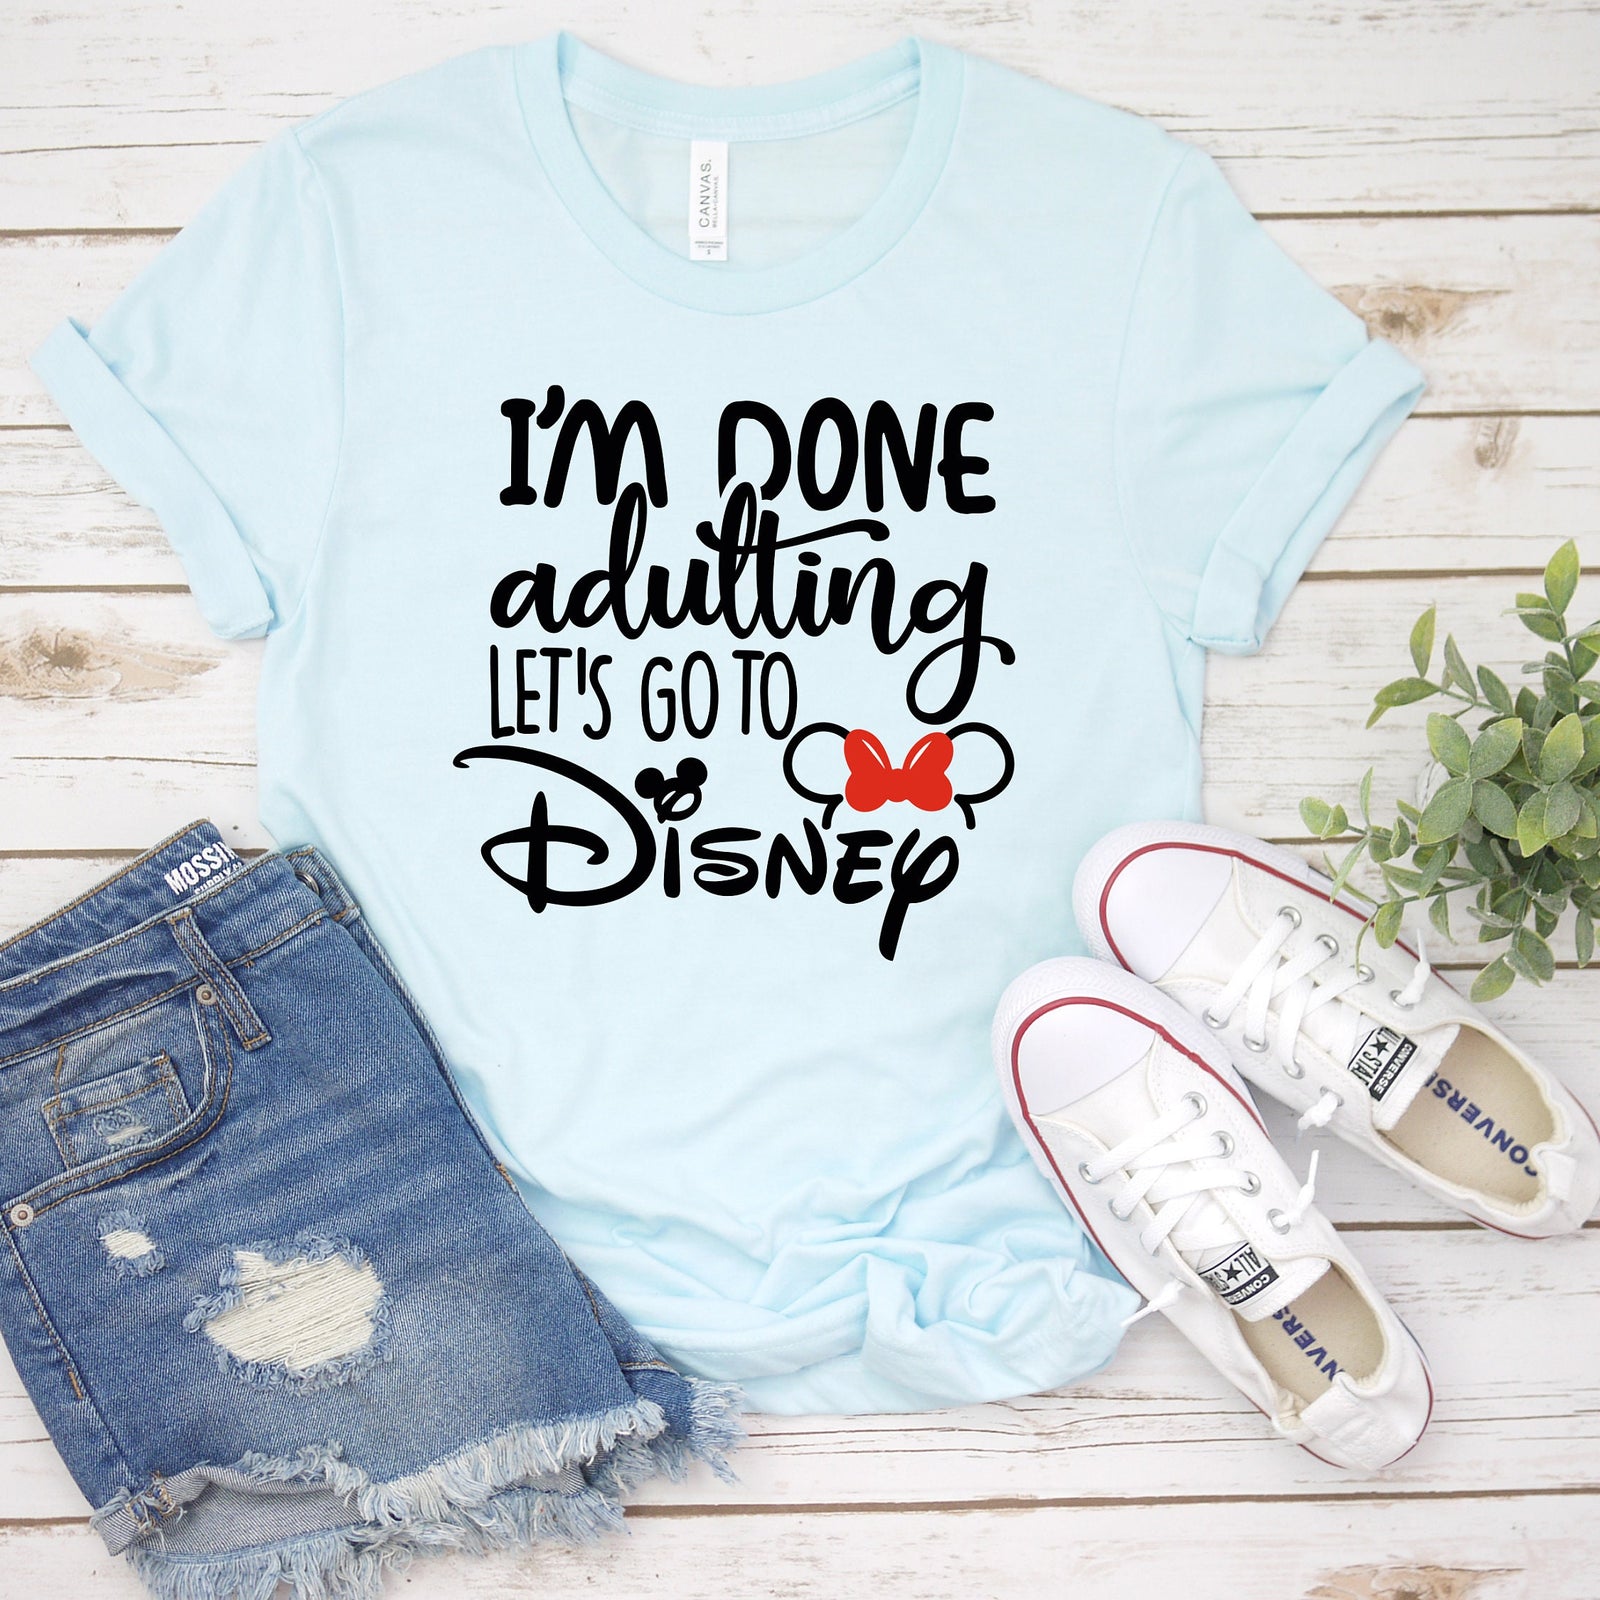 I'm Done Adulting Let's Go to Disney Minnie Mouse T Shirt - Disney Trip Matching Shirts - Besties Girls Trip